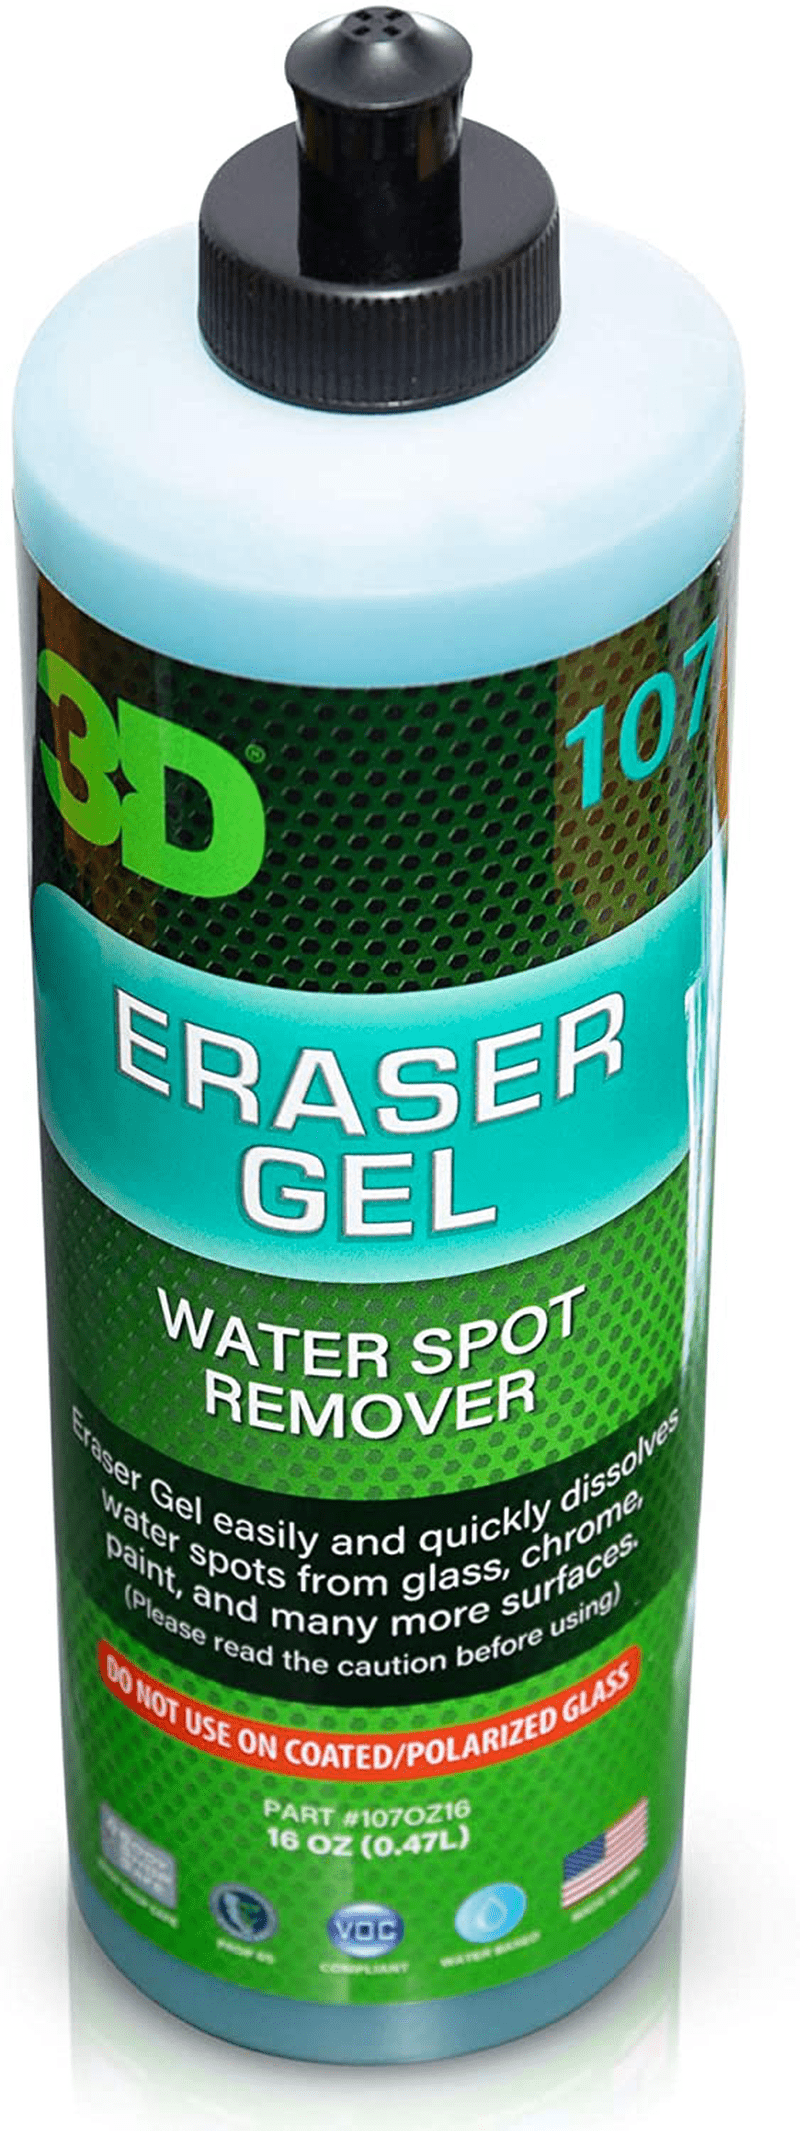 3D Eraser Gel Hard Water Stain Remover - 16 oz - Hard Water Spot Remover for Cars, Glass, and Paint - All Natural Shower Door Cleaner - Cleans Mirrors, Windows, Chrome Surfaces, and More  3D   